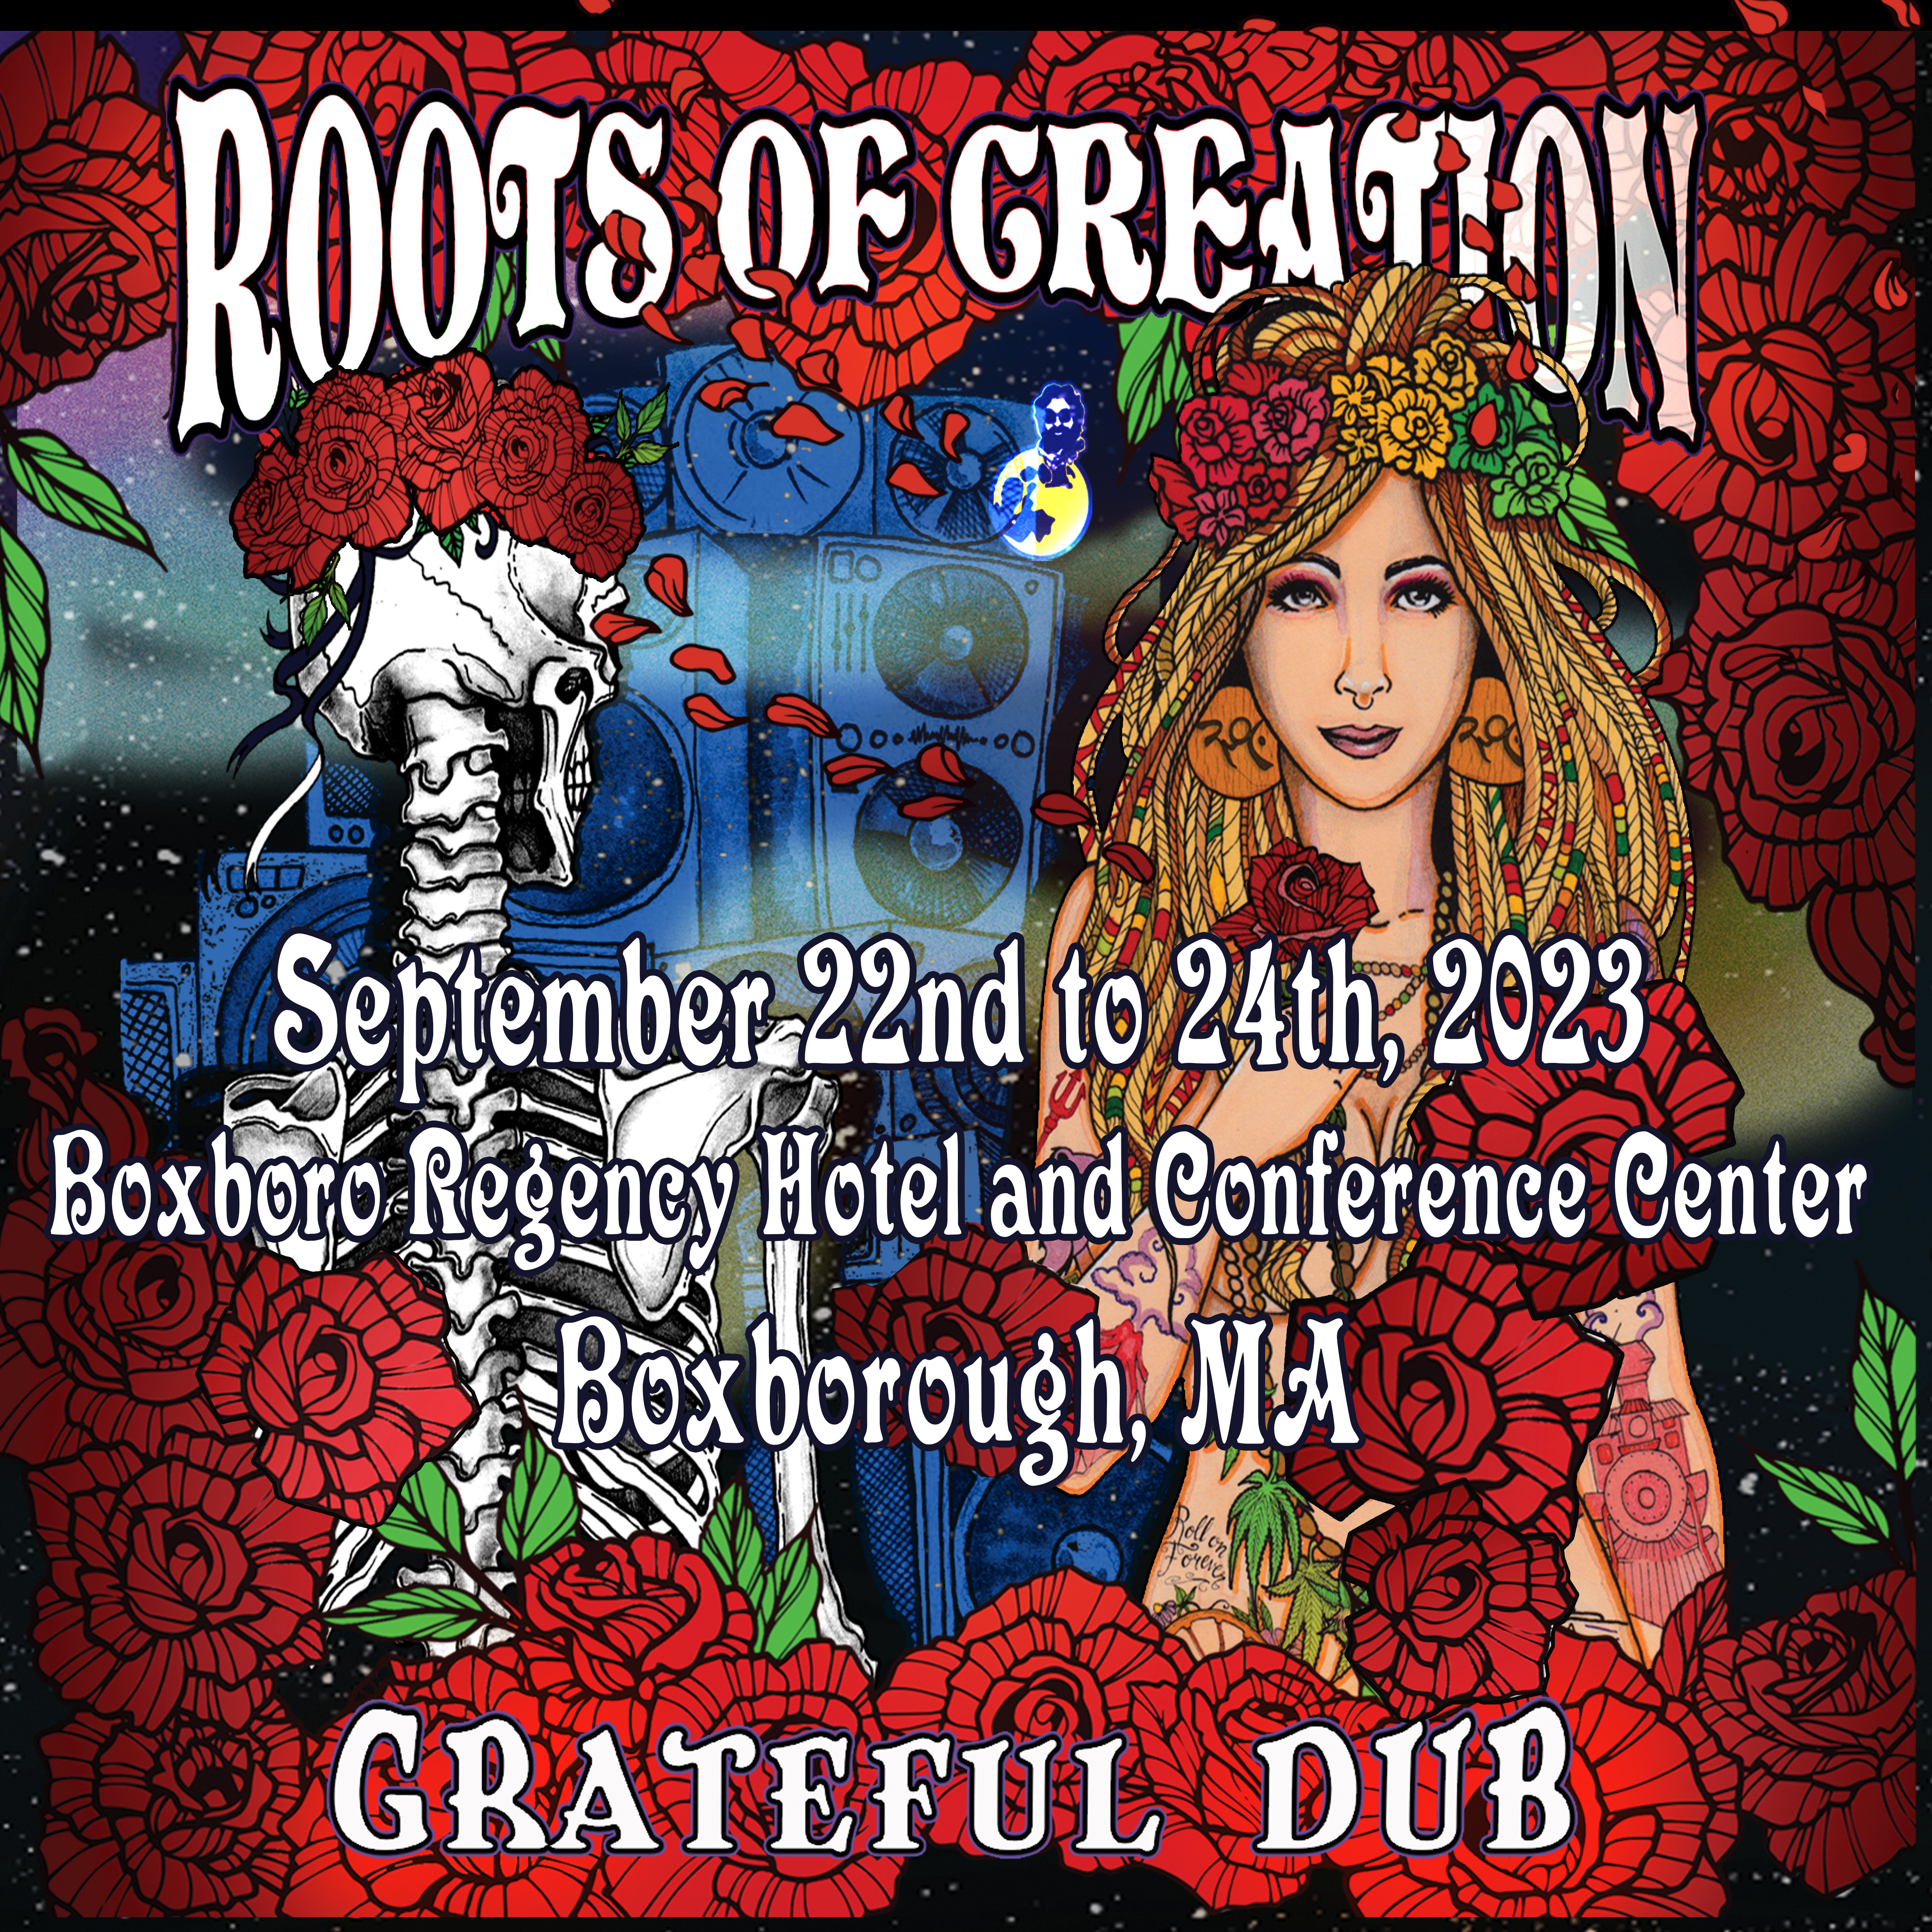 RoC (Roots of Creation) has taken on a unique new project: Grateful Dub: a Reggae-infused tribute to the Jerry Garcia & The Grateful Dead.